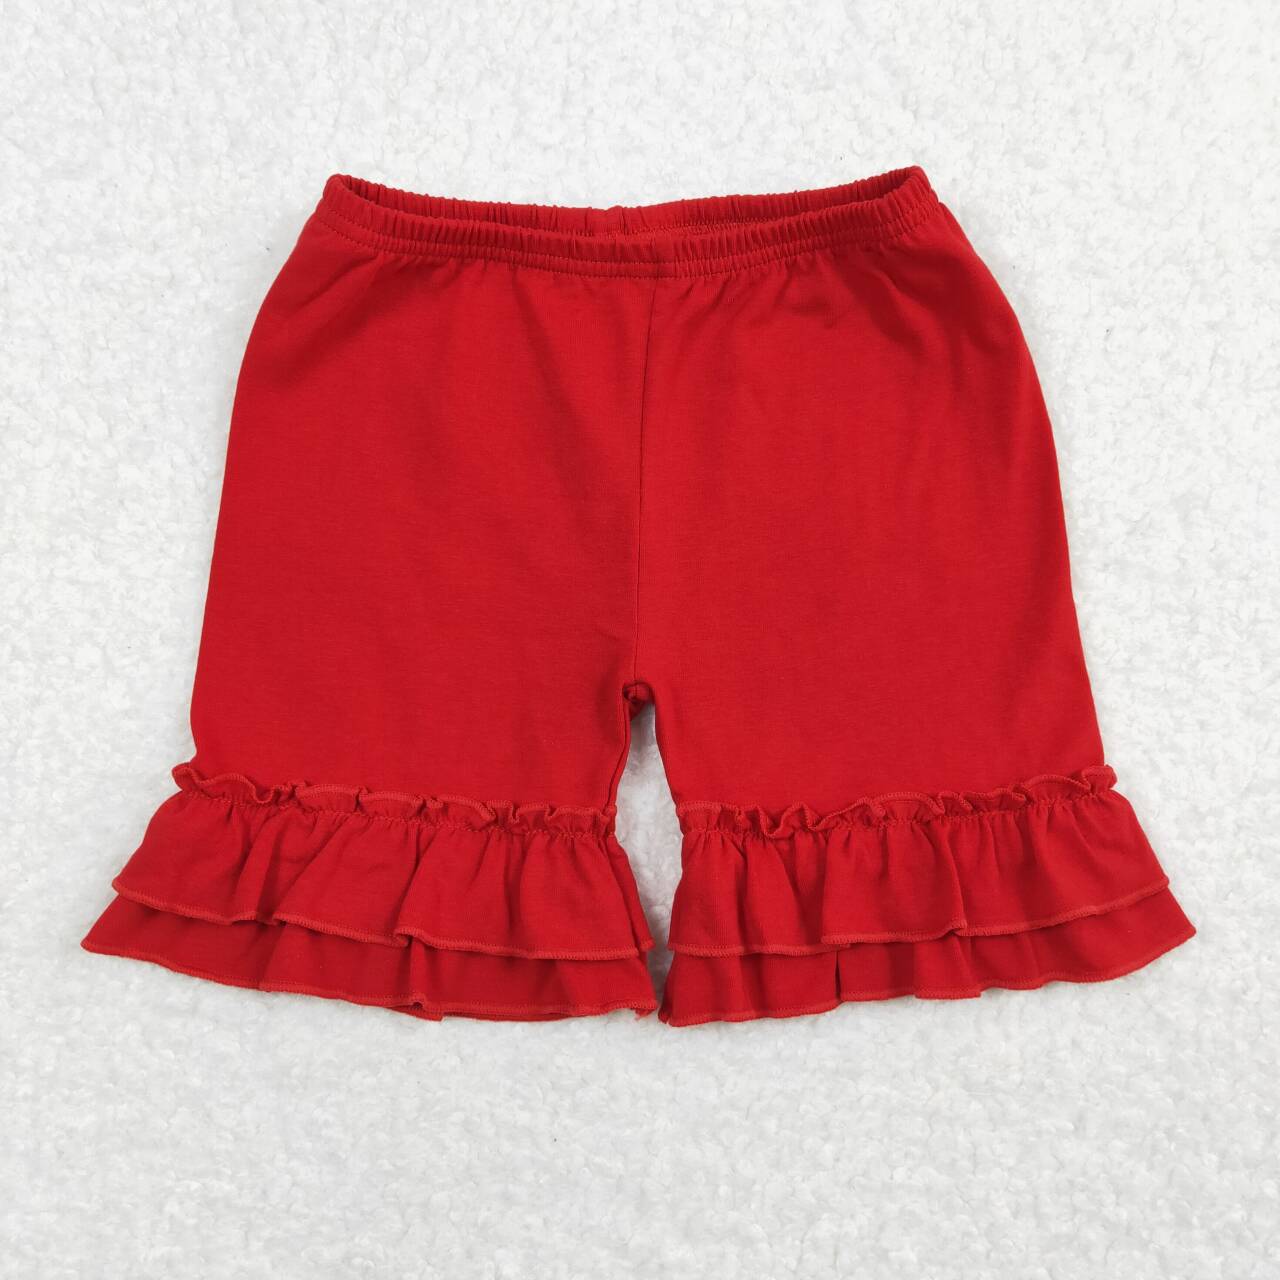 SS0184 RTS toddler clothes red ruffle girl summer shorts cotton summer bottom